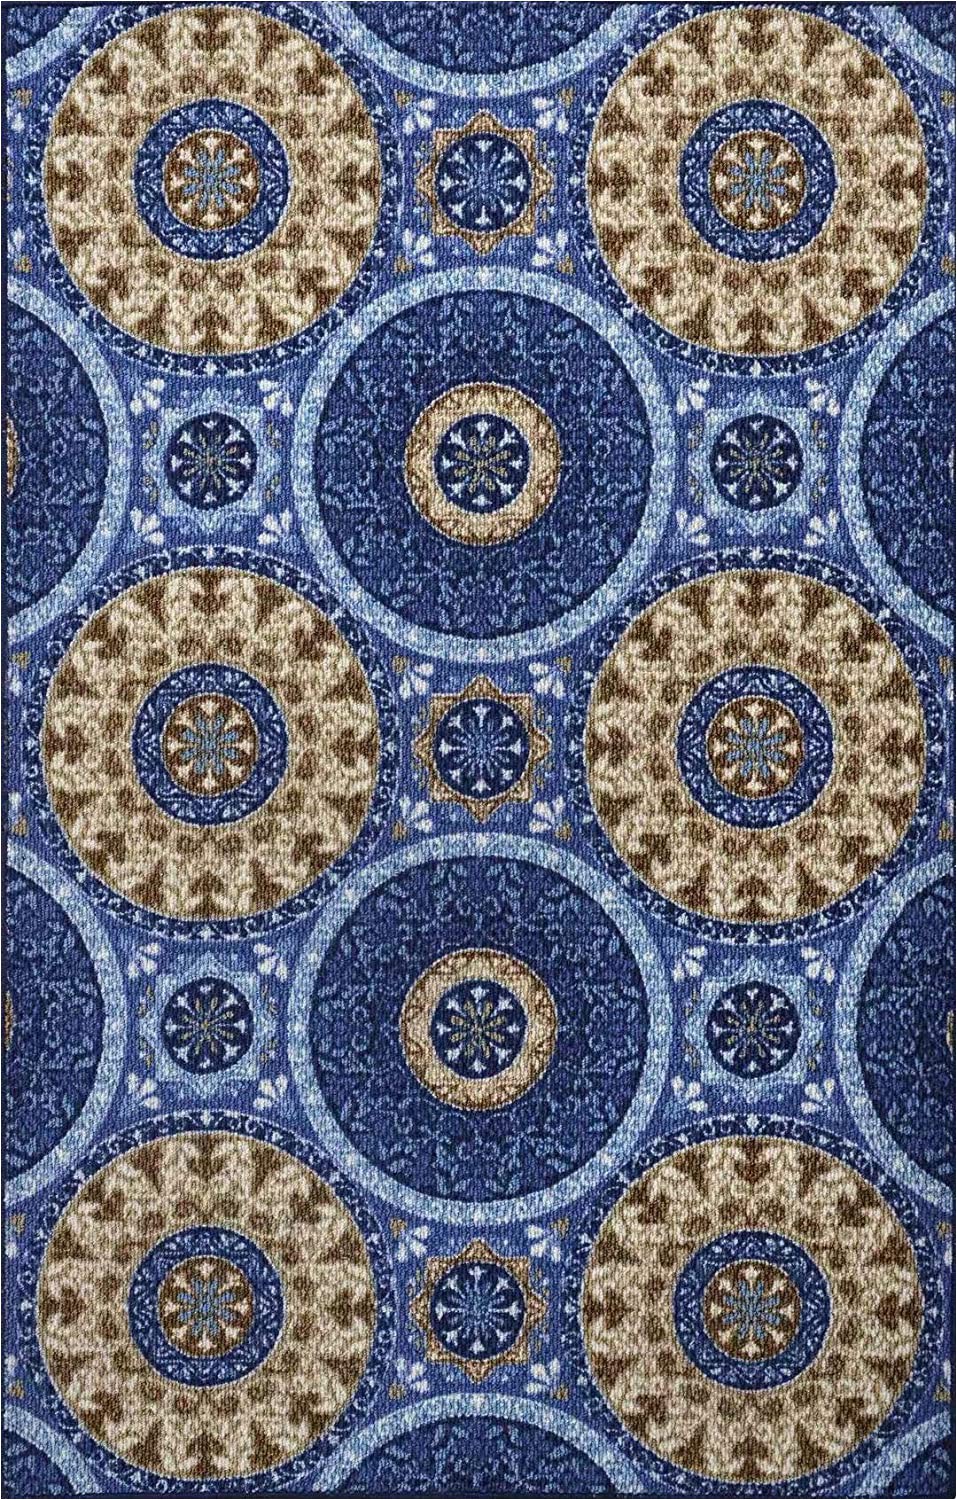 Rubber Mats for Under area Rugs Amazon Majestic Looms Dav9 Blue Beige Non Slip Rugs